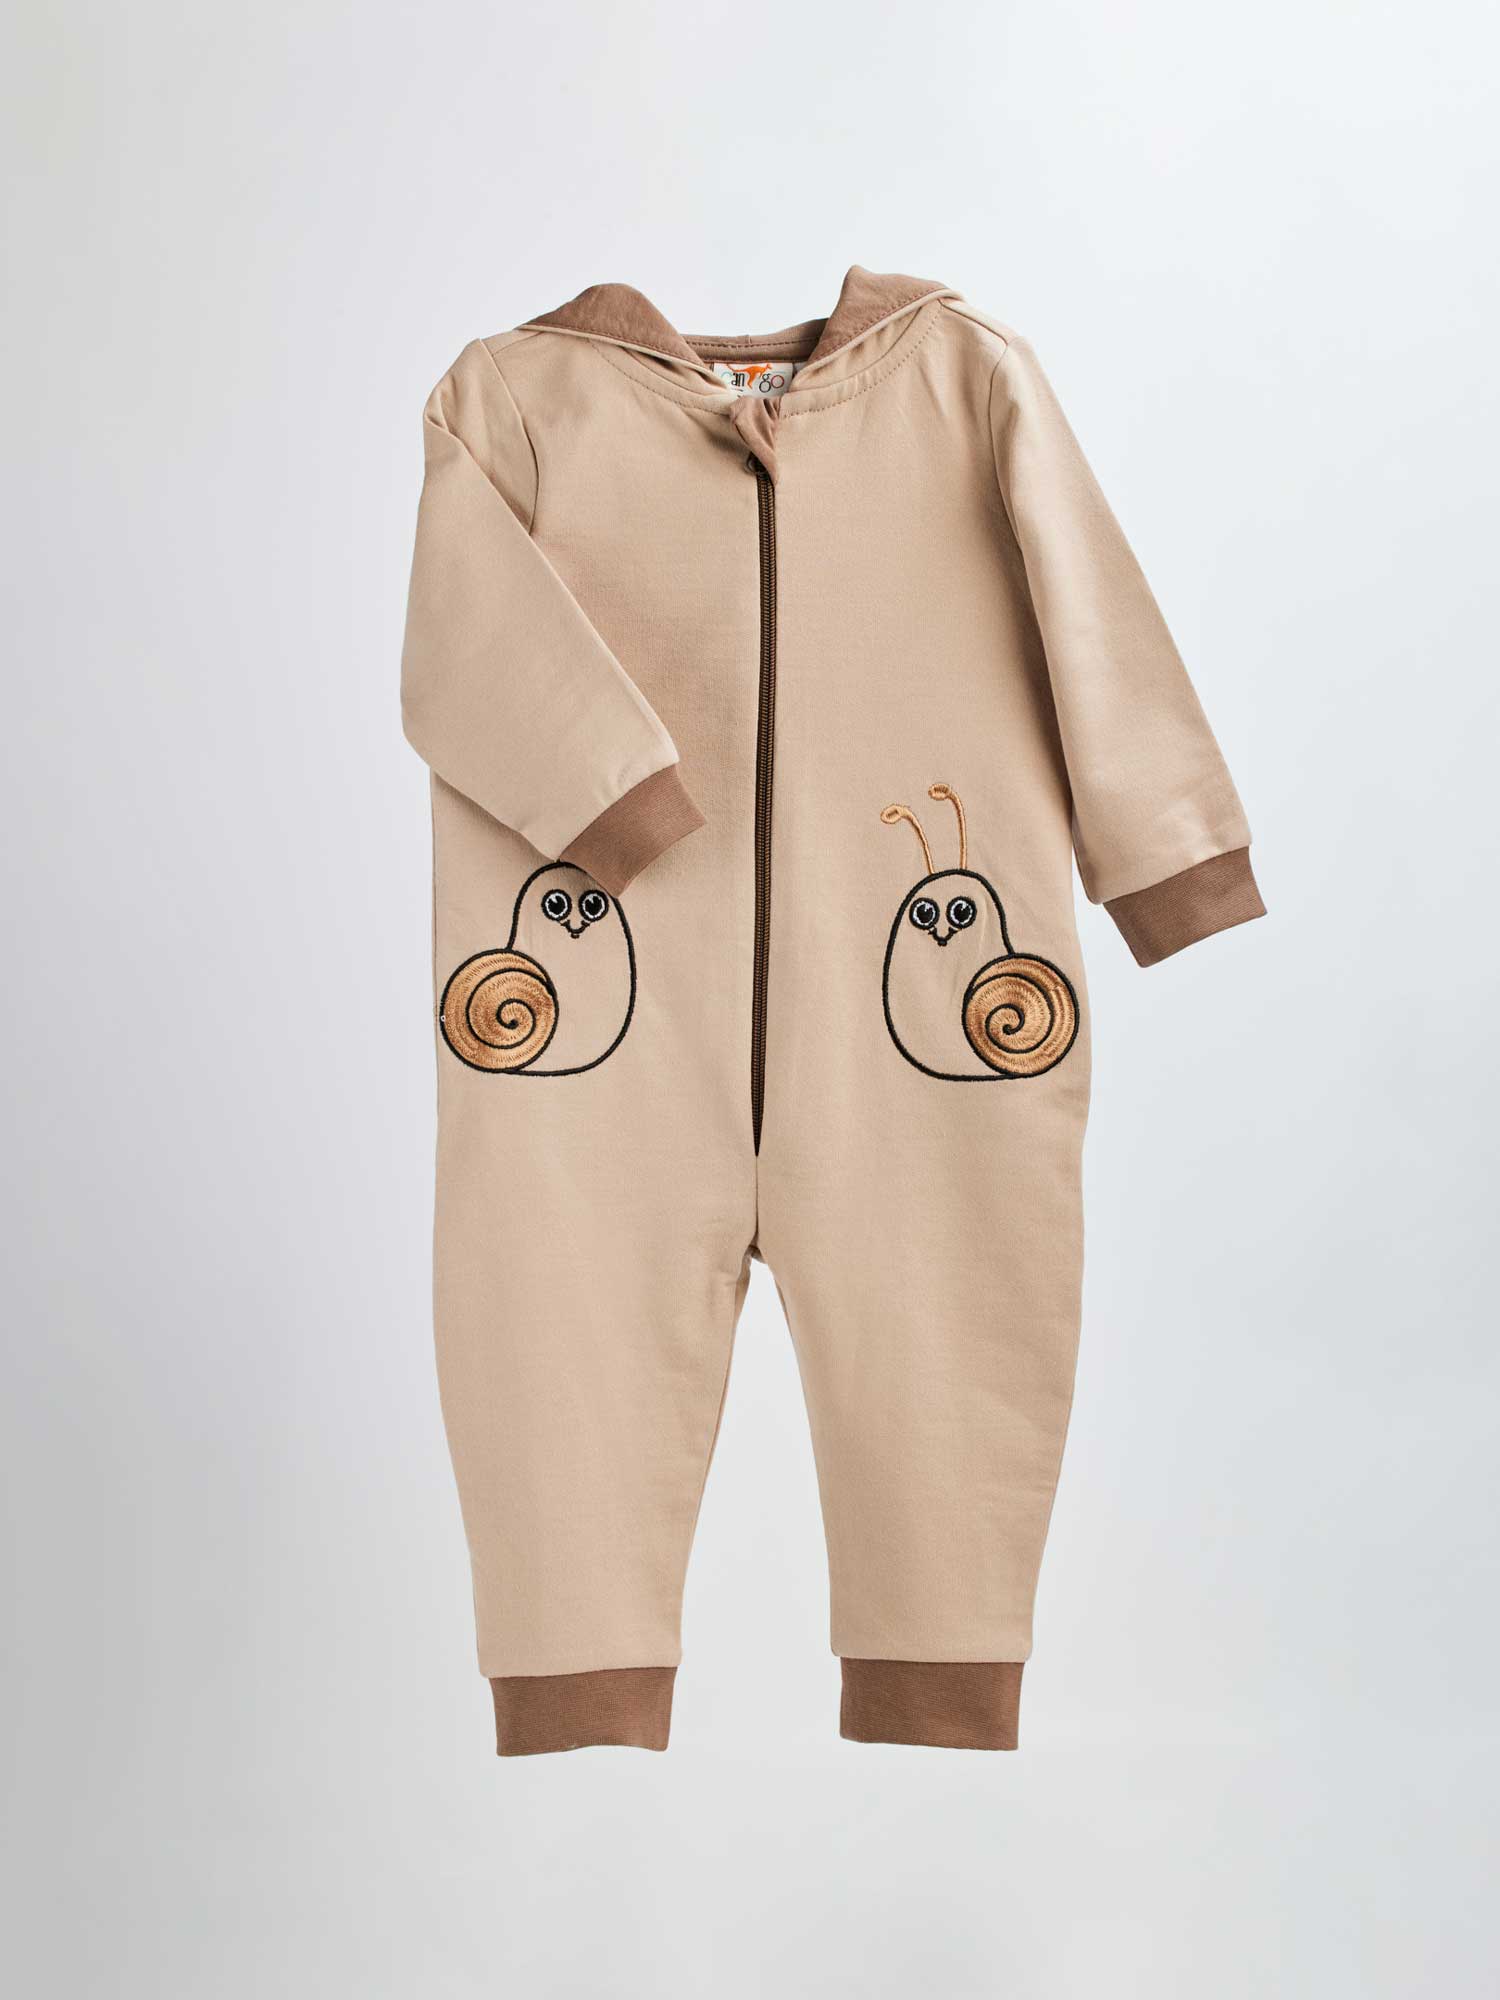 Infant overall snails 287 are one-piece hooded overalls made from high-quality soft cotton material and have embroidered sweet snails on them.